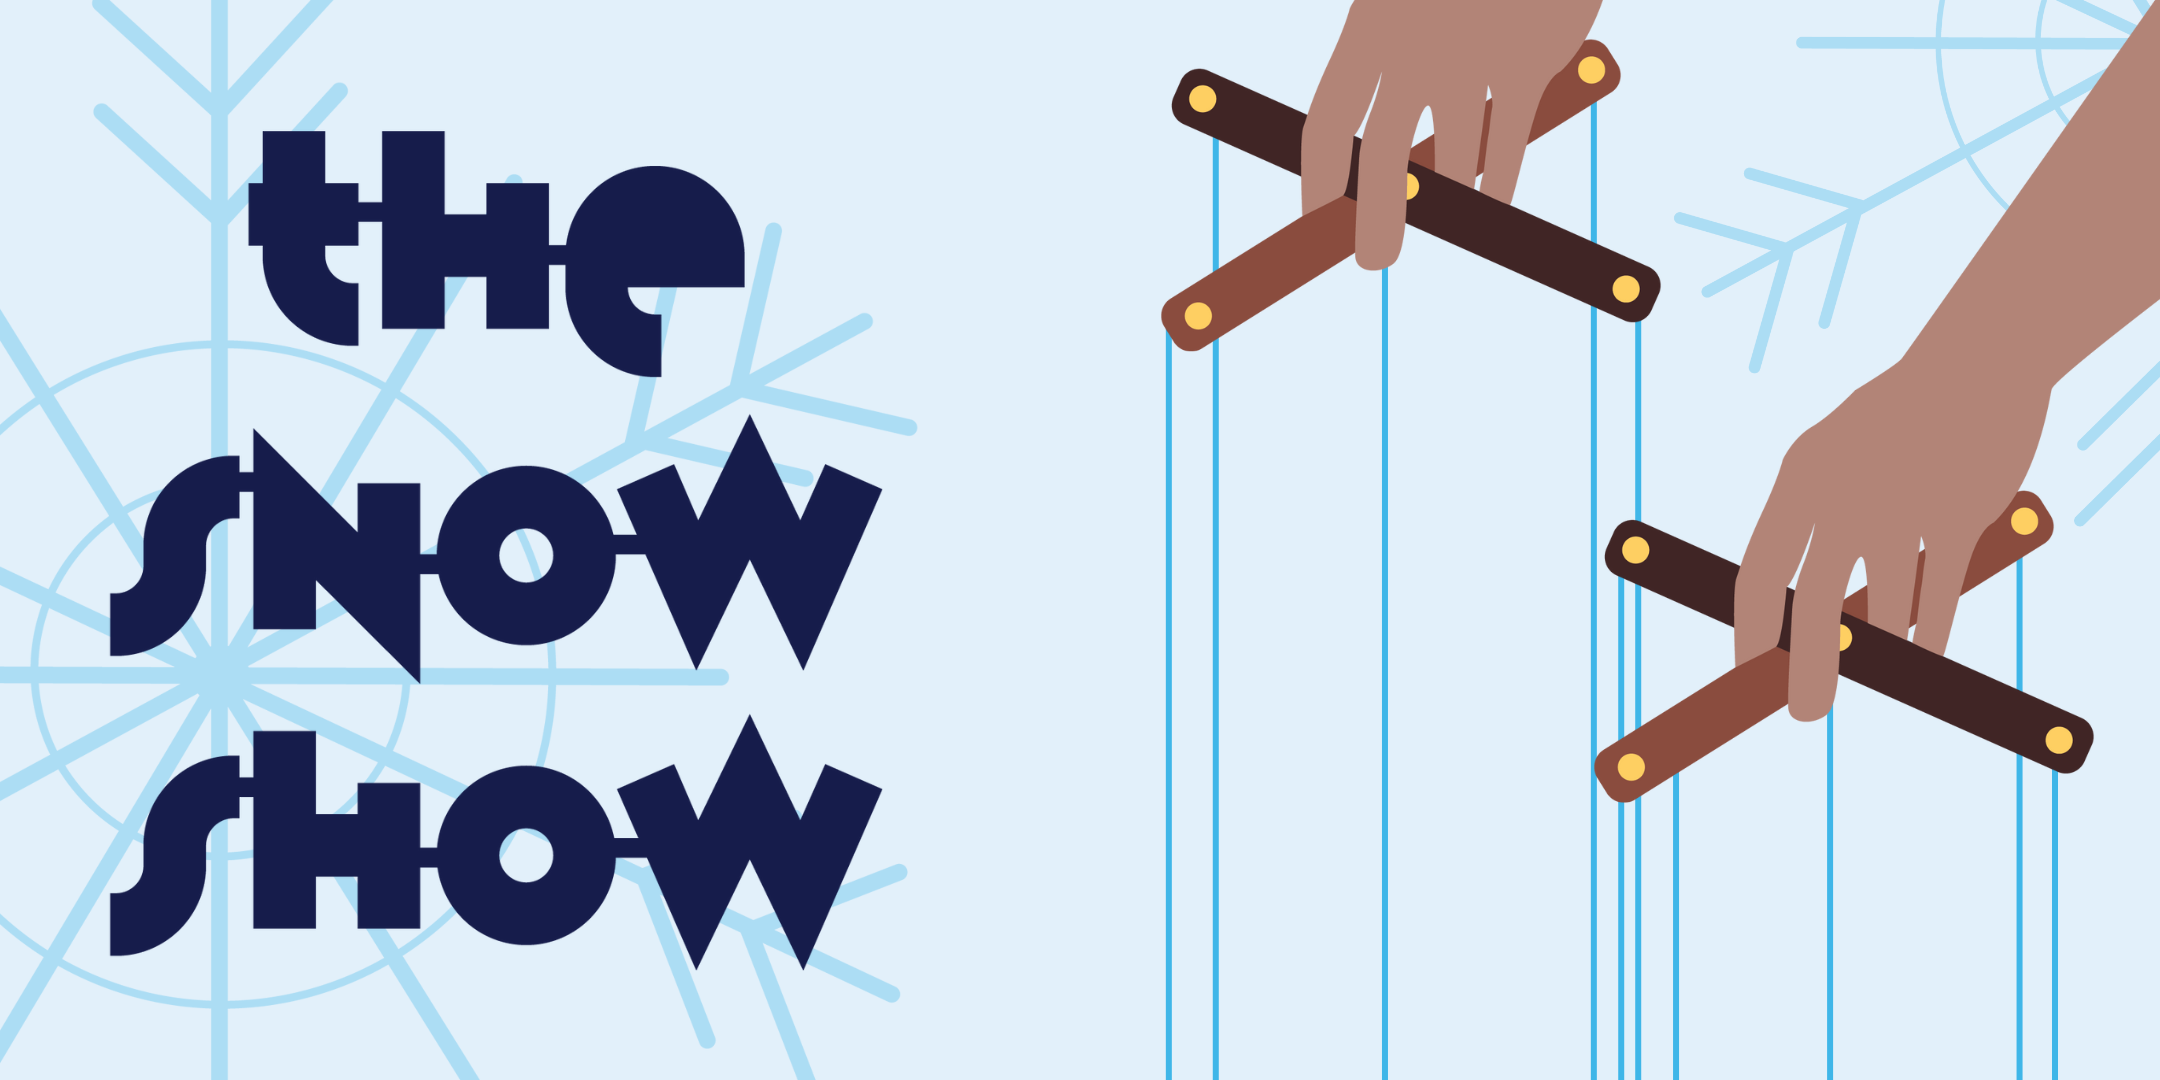 image of "The Snow Show"